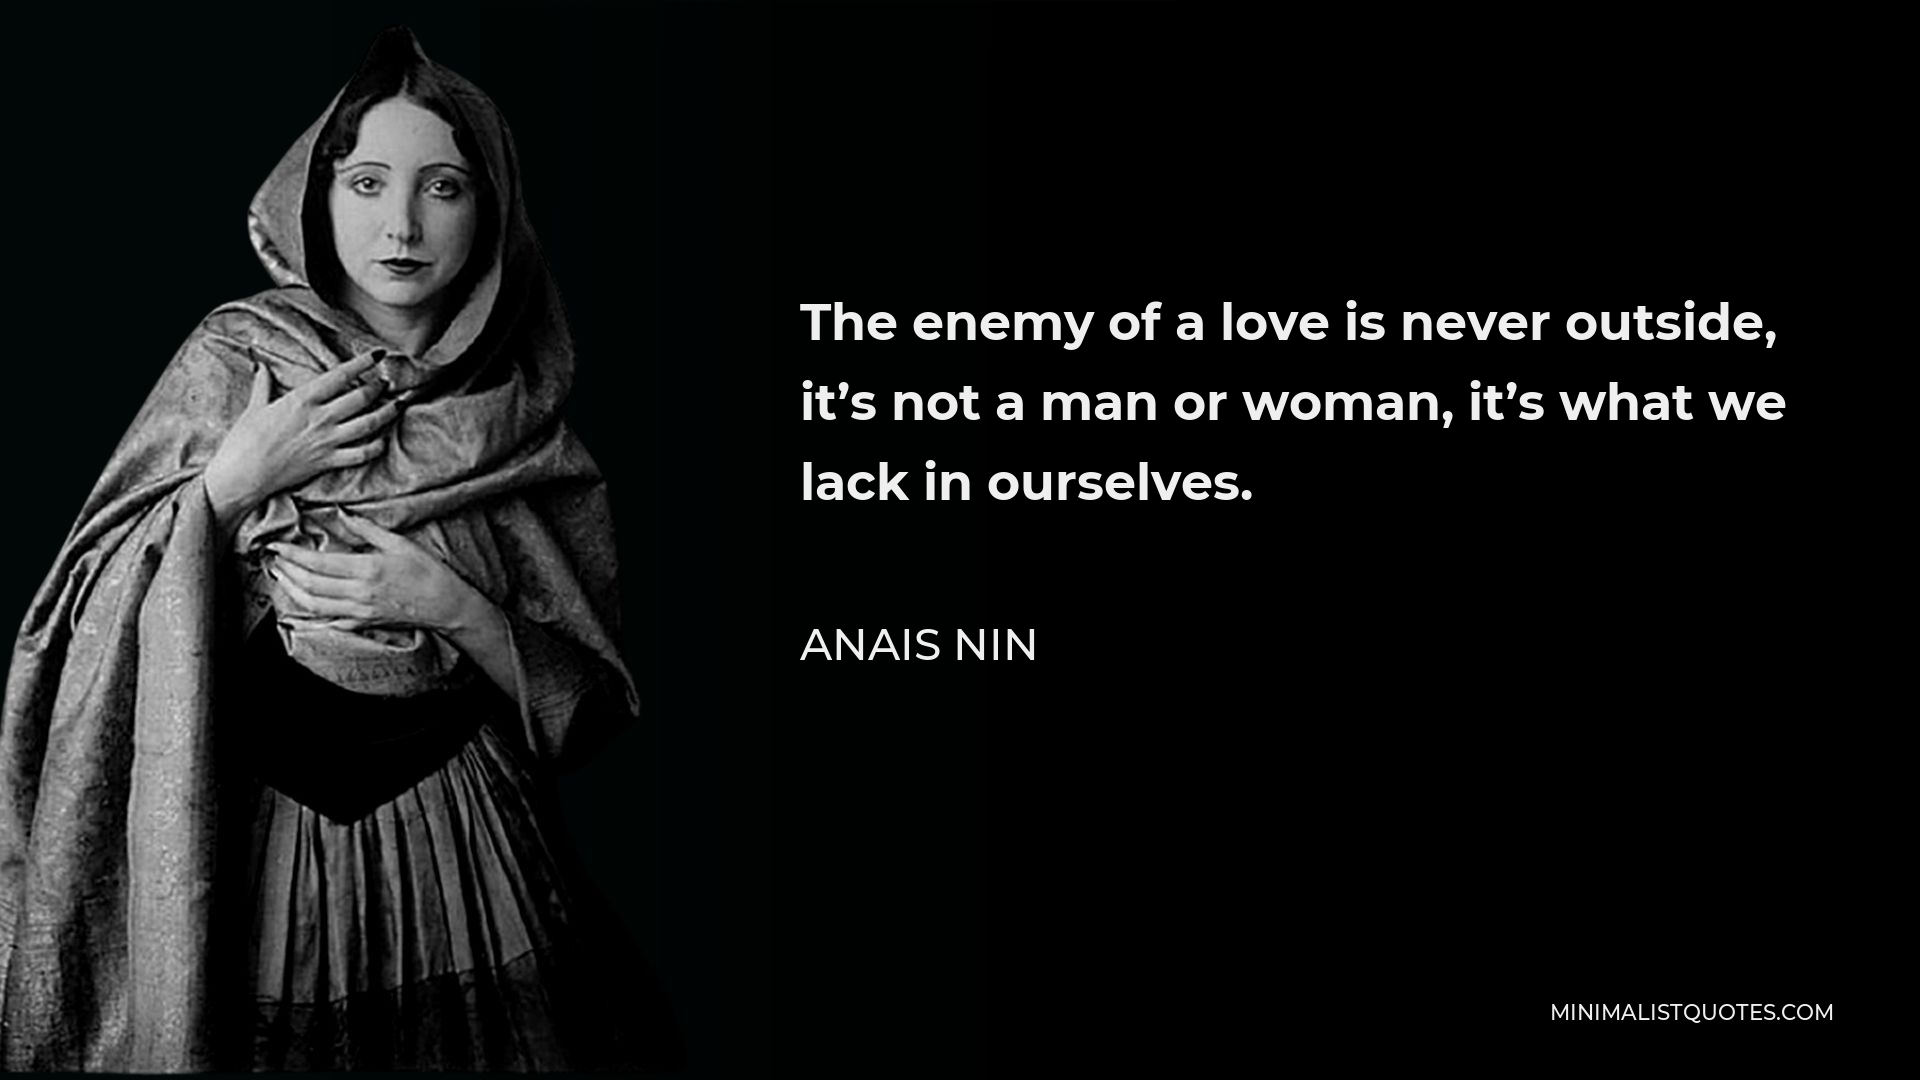 Anais Nin Quote - The enemy of a love is never outside, it’s not a man or woman, it’s what we lack in ourselves.